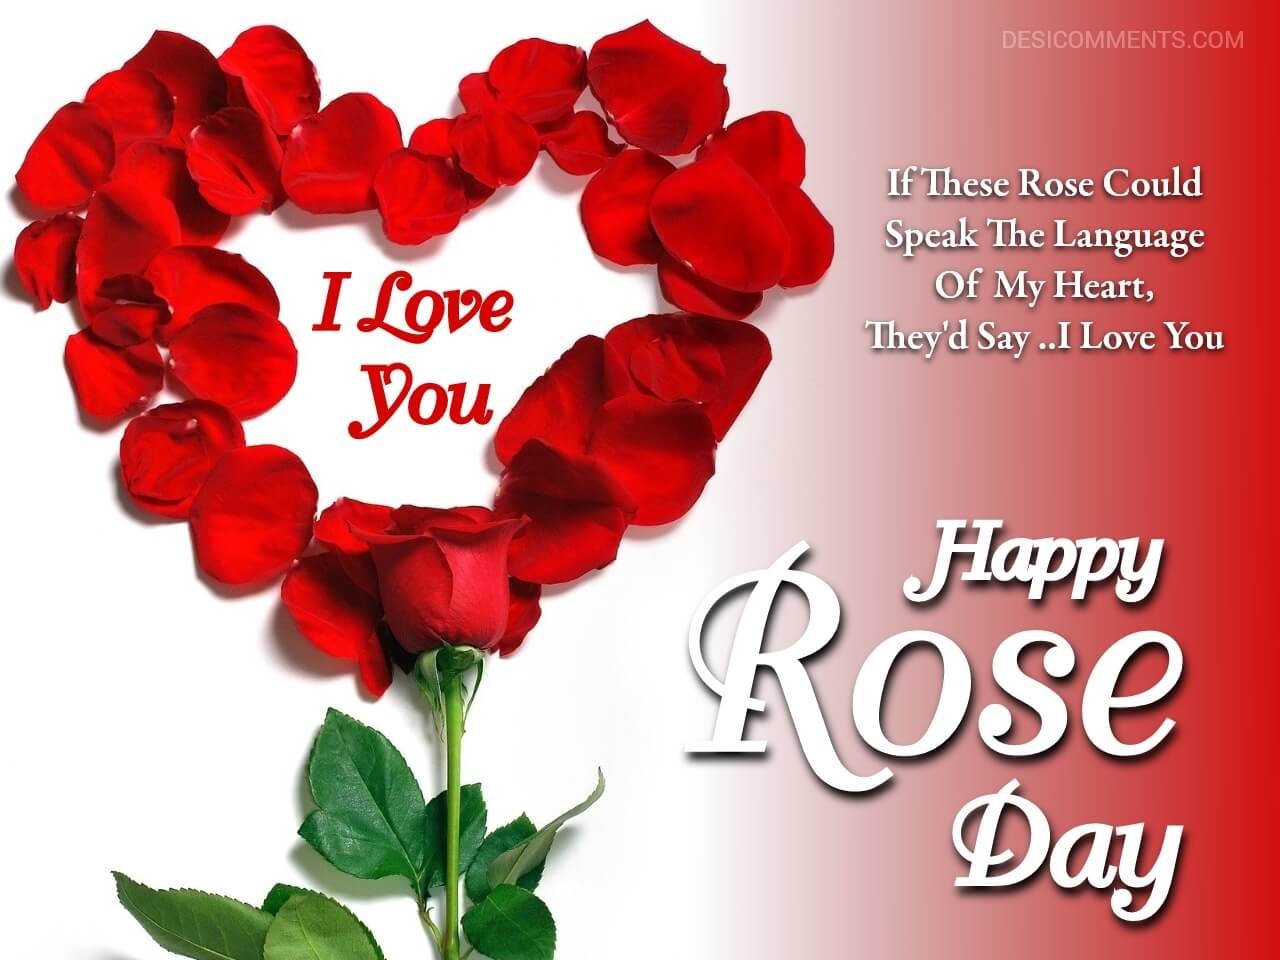 I Love You Happy Rose Day - DesiComments.com